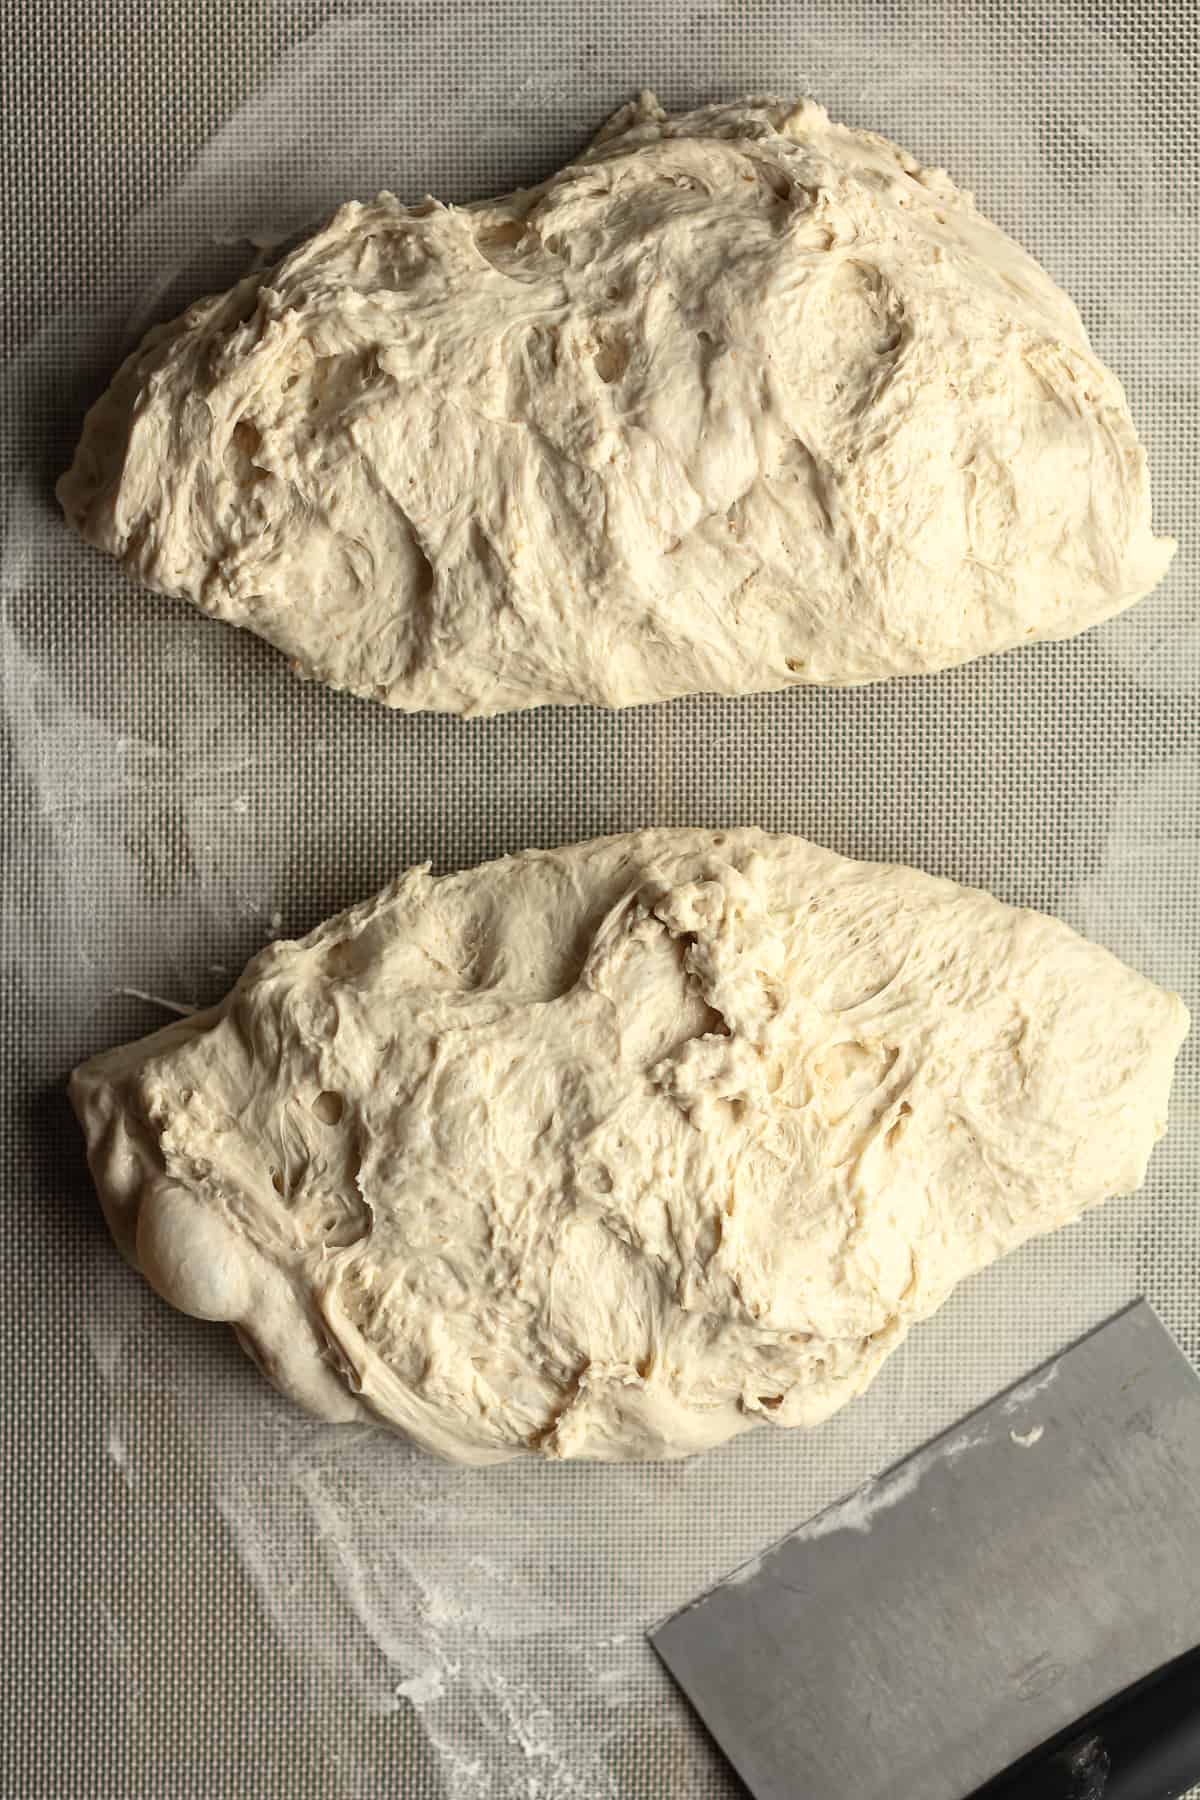 Two halves of sourdough before forming into loaves.